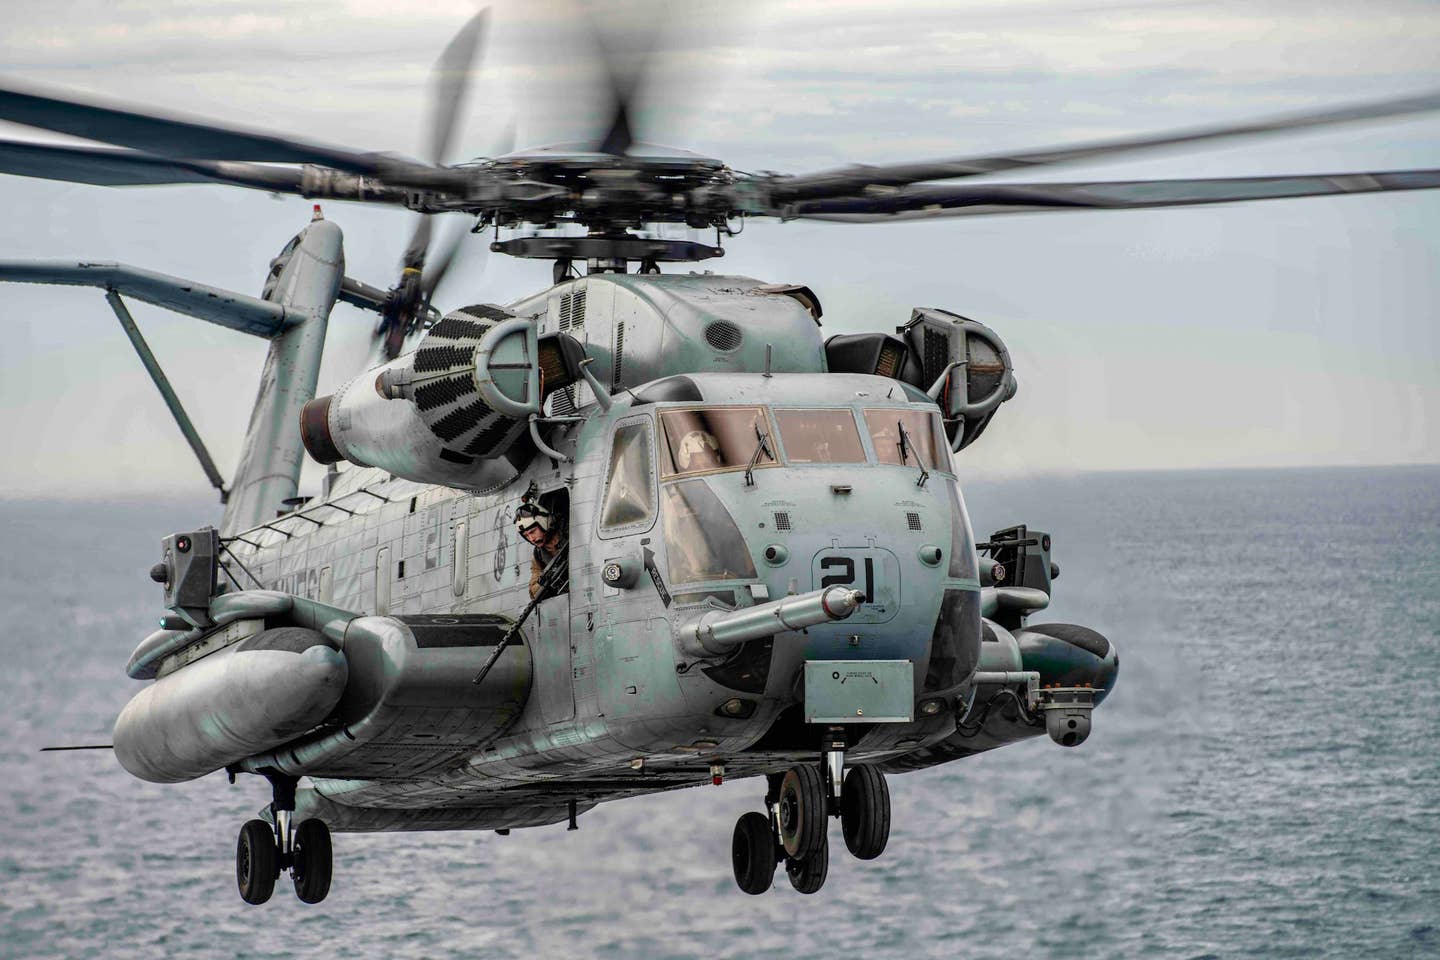 A Marine Corps CH-53E attached to Marine Medium Tiltrotor Squadron (VMM) 165 (Reinforced), 15th Marine Expeditionary Unit, takes off from the flight deck of amphibious transport dock USS <em>Somerset</em> (LPD-25) in the Pacific Ocean, on November 15, 2023. <em>U.S. Marine Corps Photo by Sgt. Patrick Katz</em>